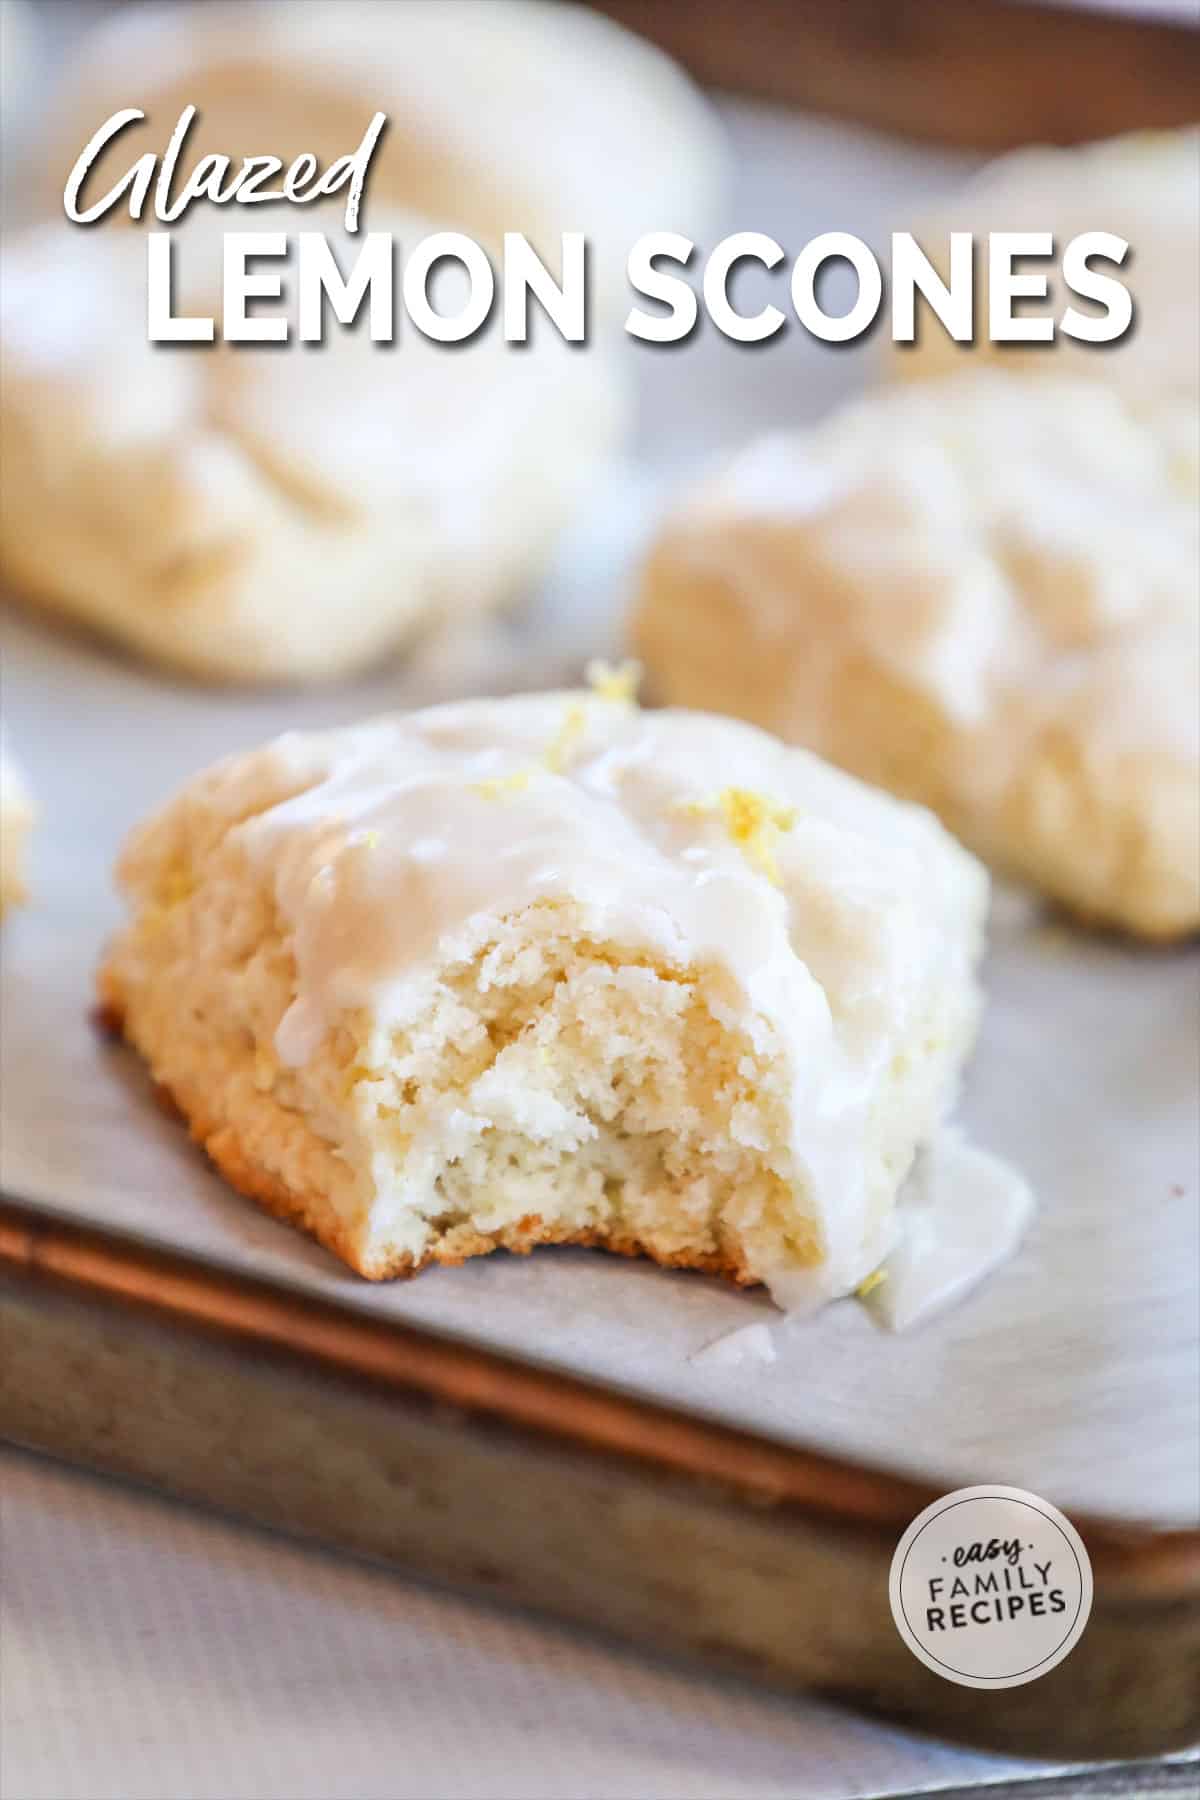 Close up of a glazed lemon scone with a bite taken out on a parchment-lined baking sheet with more scones nearby.